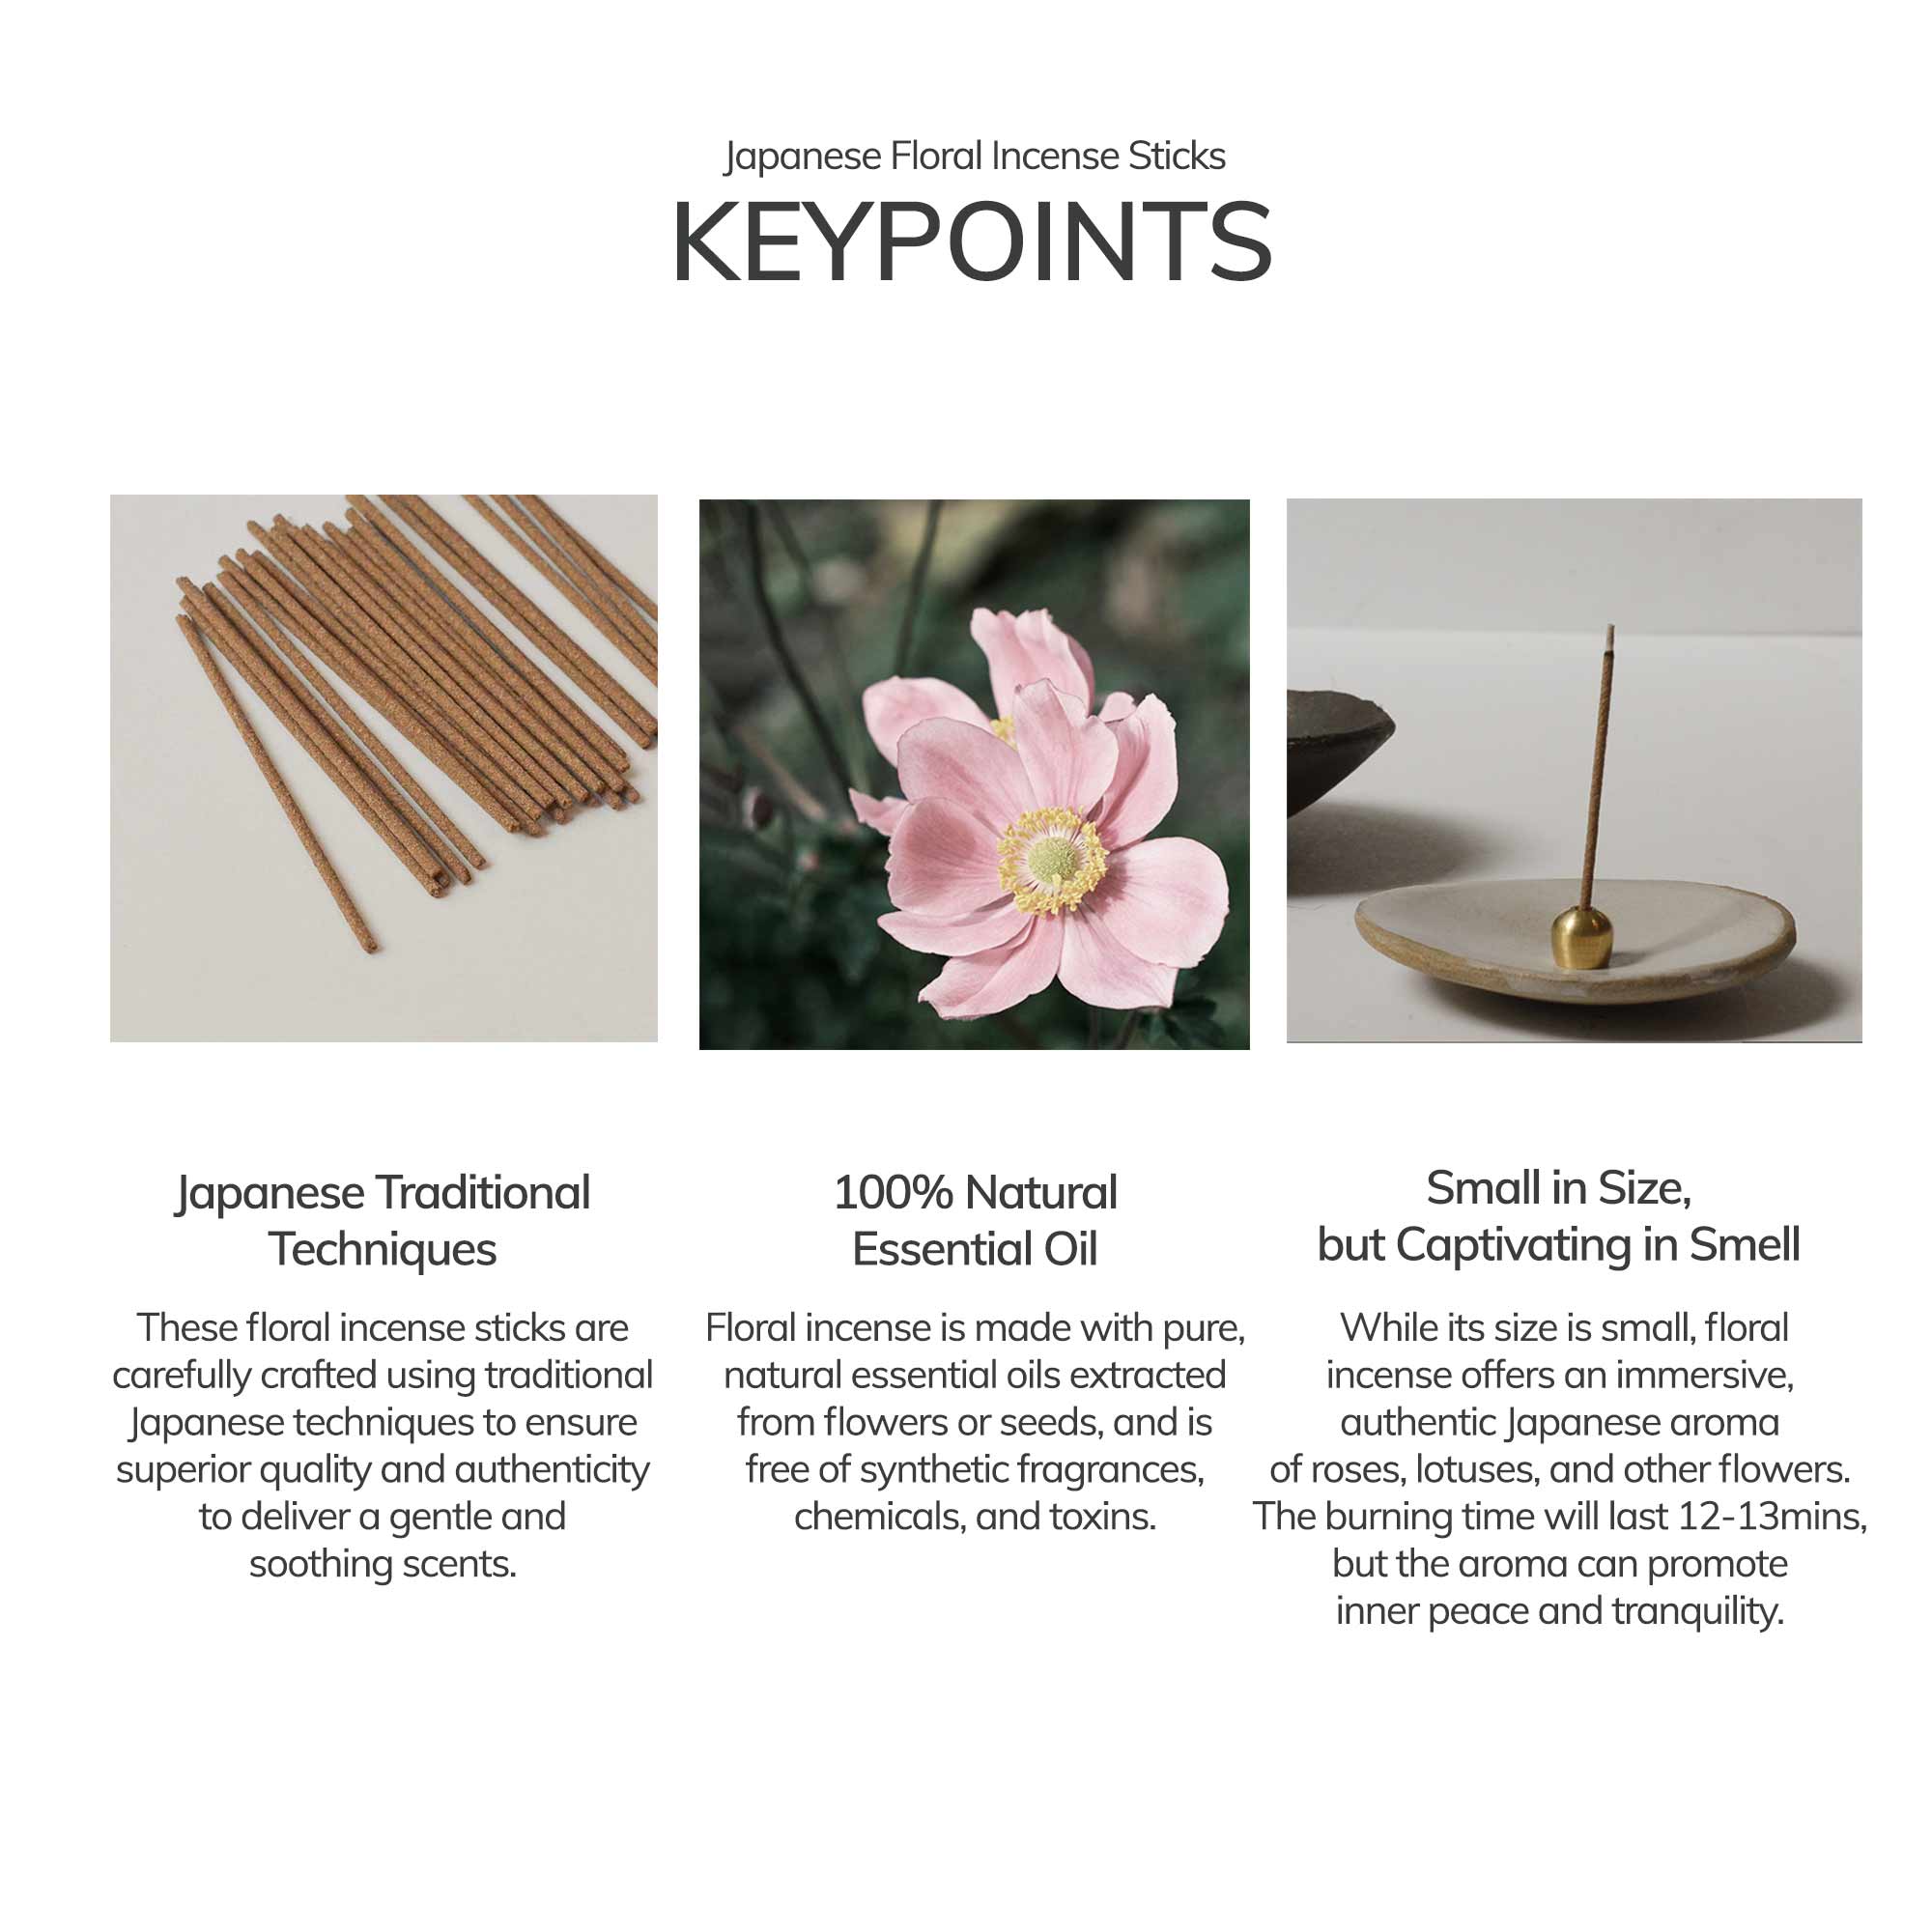 floral incense sticks with Japanese Traditional techniques, 100% essential oil extracted from the flowers, small floral incense stick on the incense holder